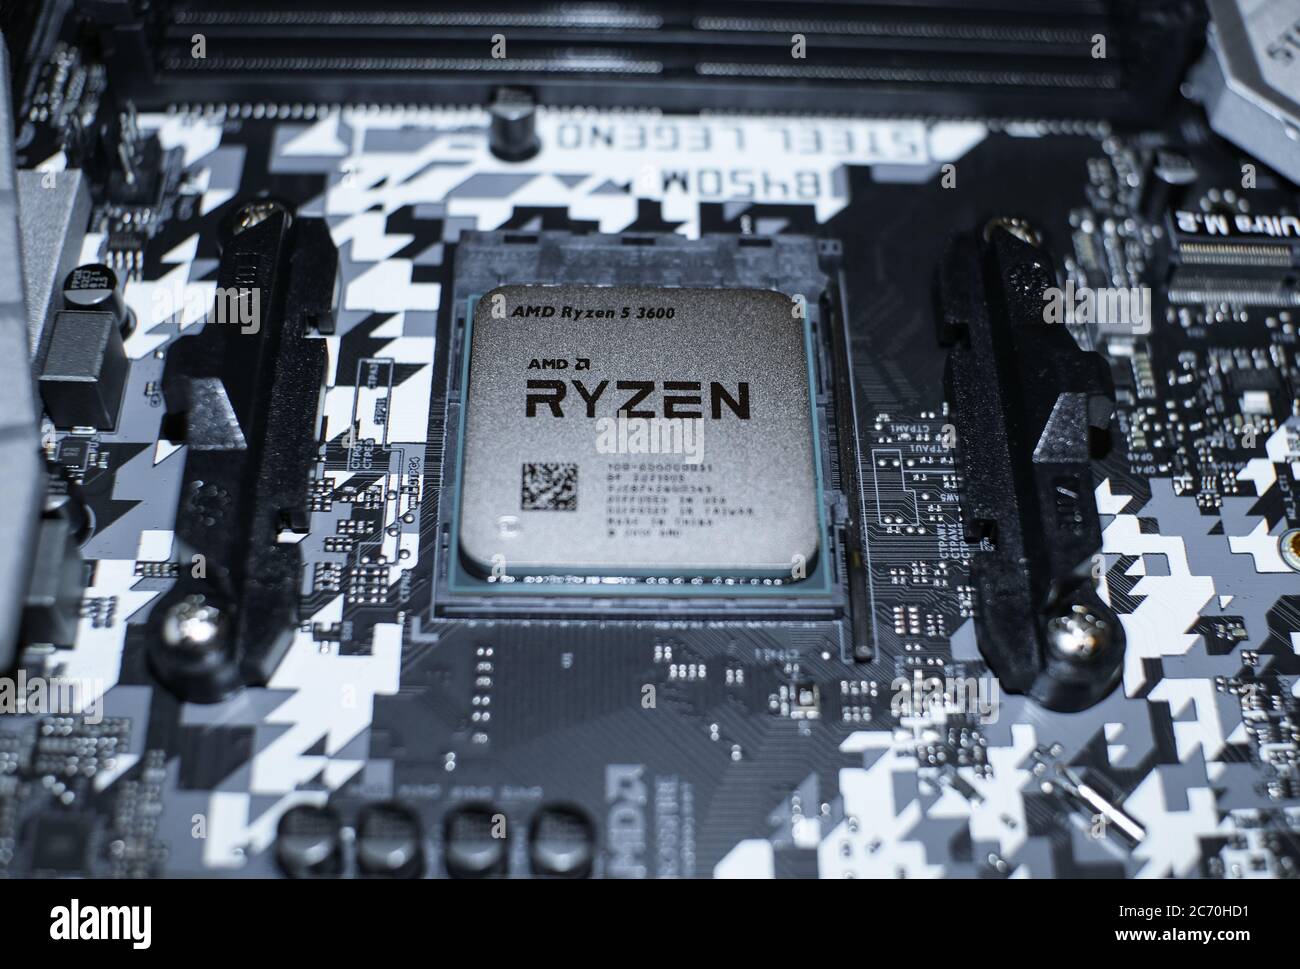 Rome,italy - july 1 2020: Amd ryzen 3600 desktop pc cpu installed on hi tech motherboard,computer components Stock Photo